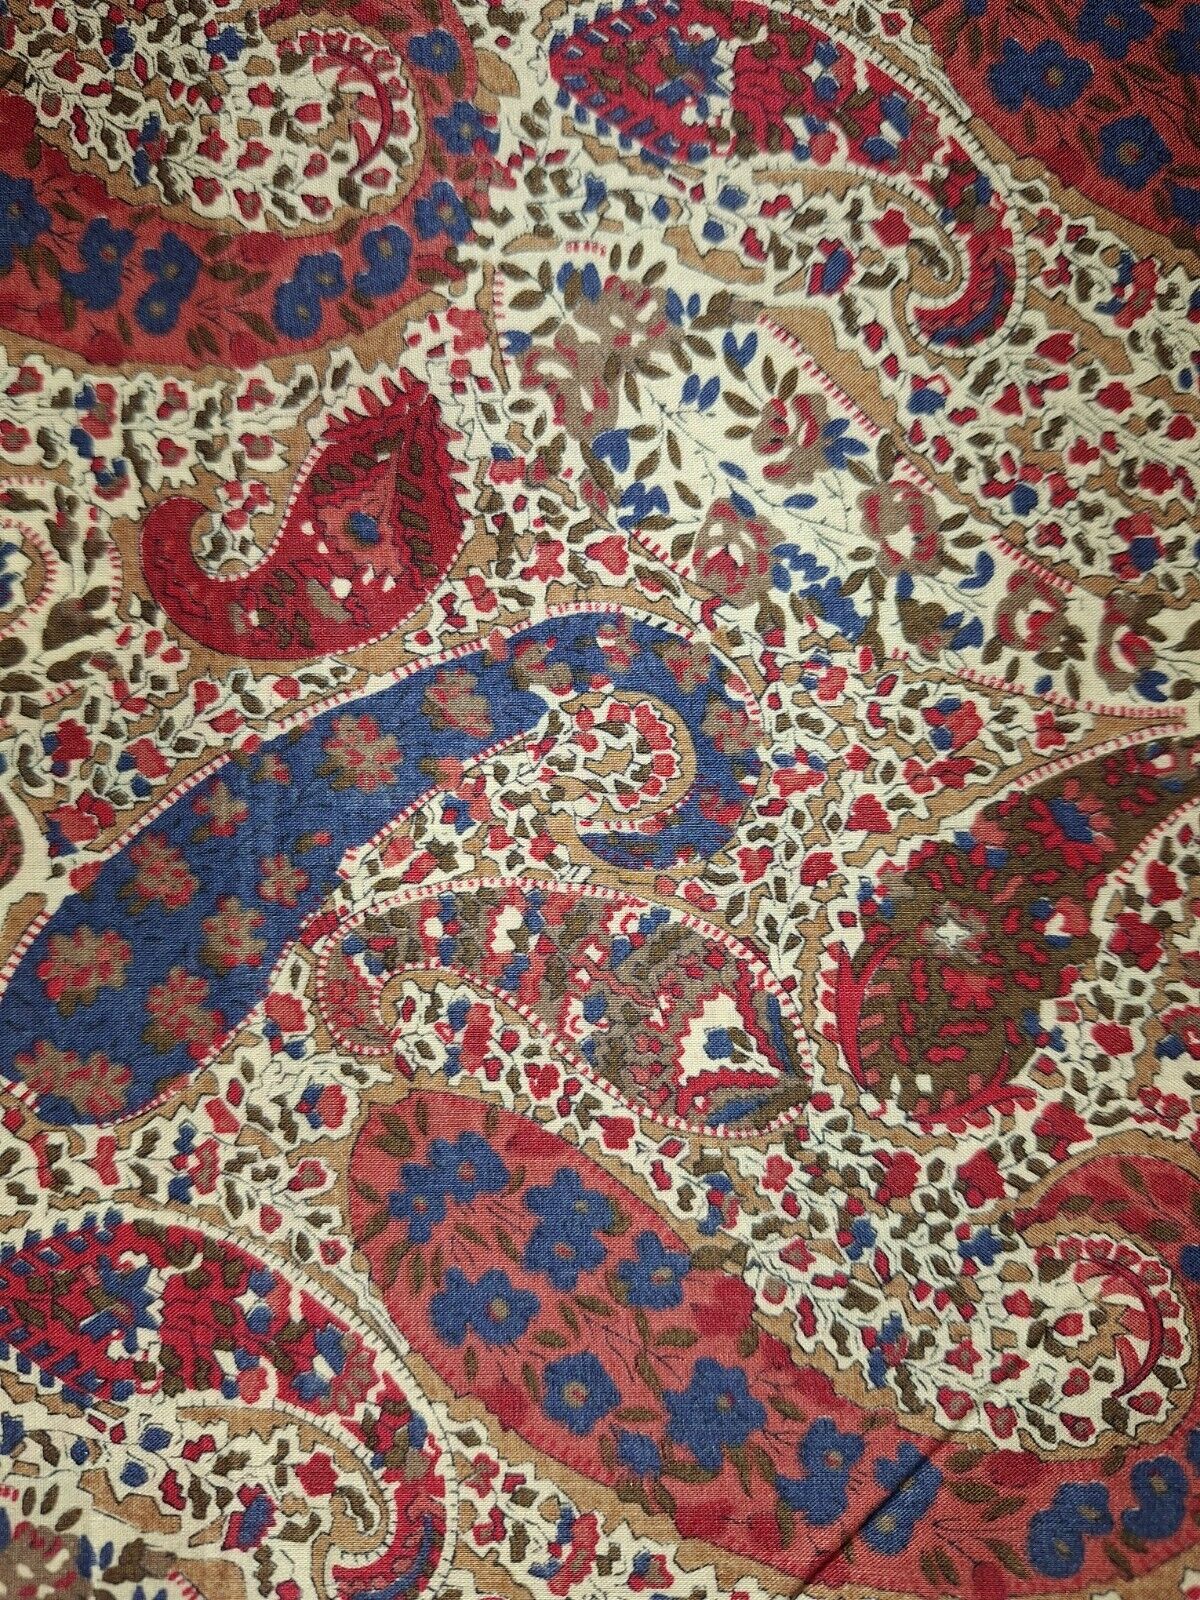 Vintage Liberty of London Paisley & Floral Cotton Fabric